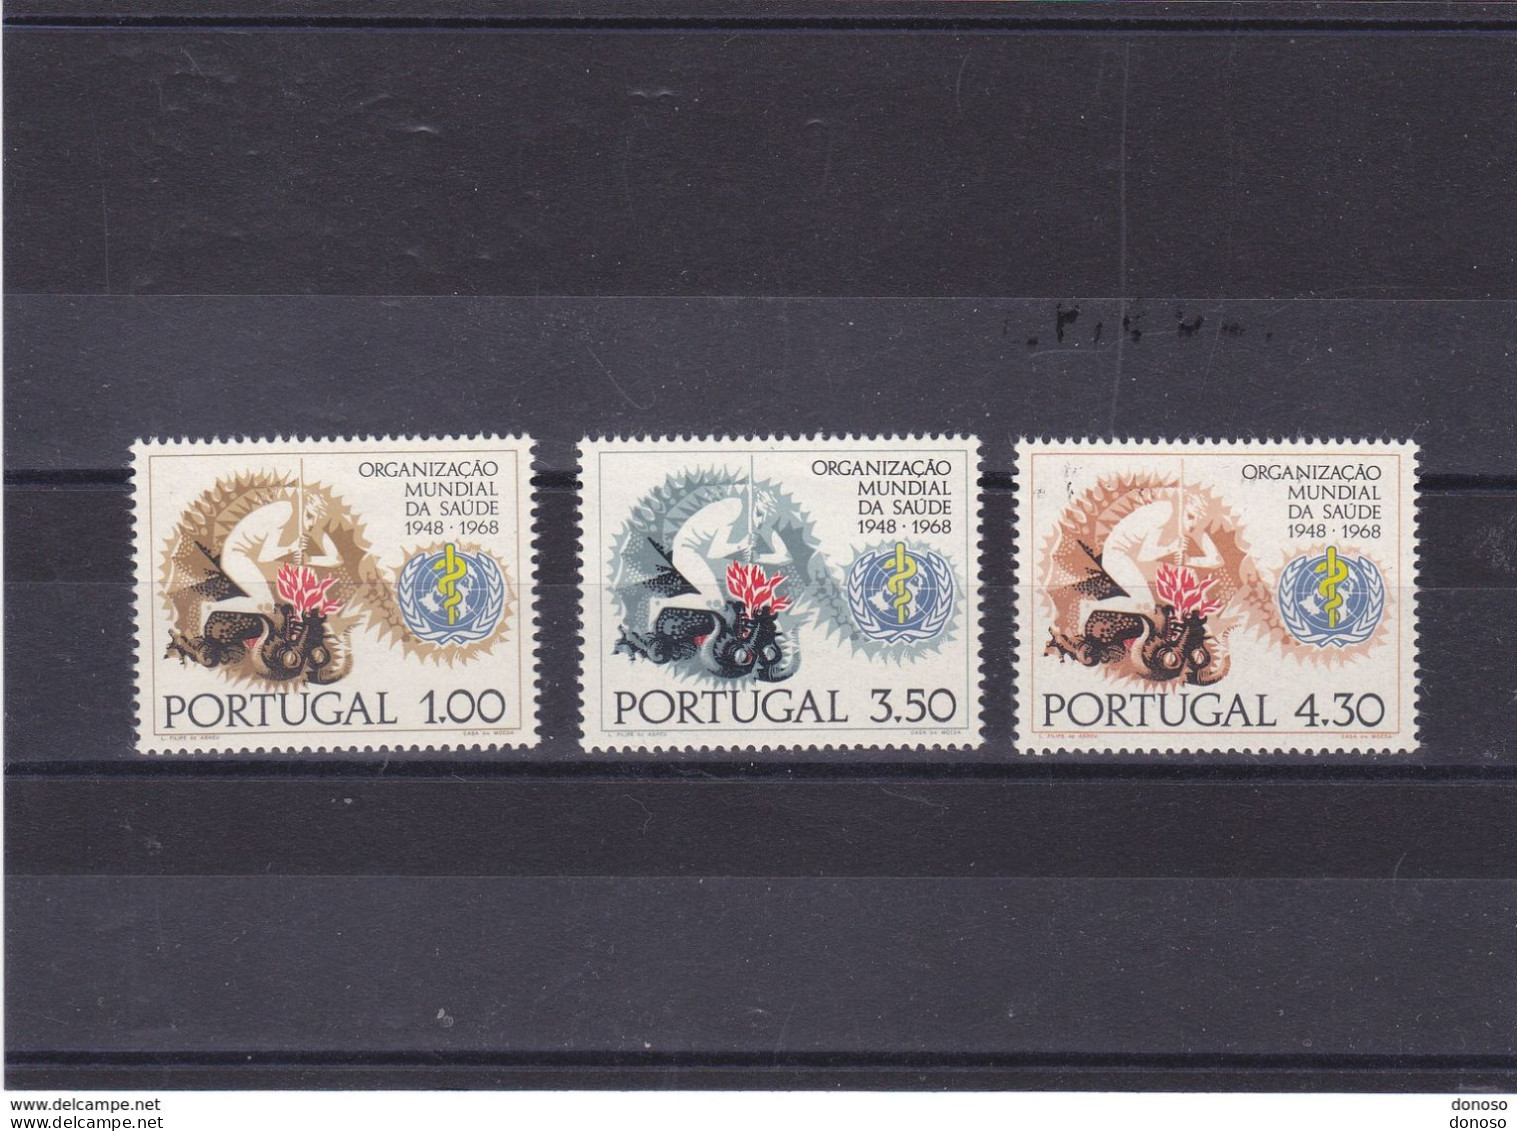 PORTUGAL 1968 OMS Yvert 1038-1040, Michel 1057-1059 NEUF** MNH Cote Yv 11 Euros - Unused Stamps